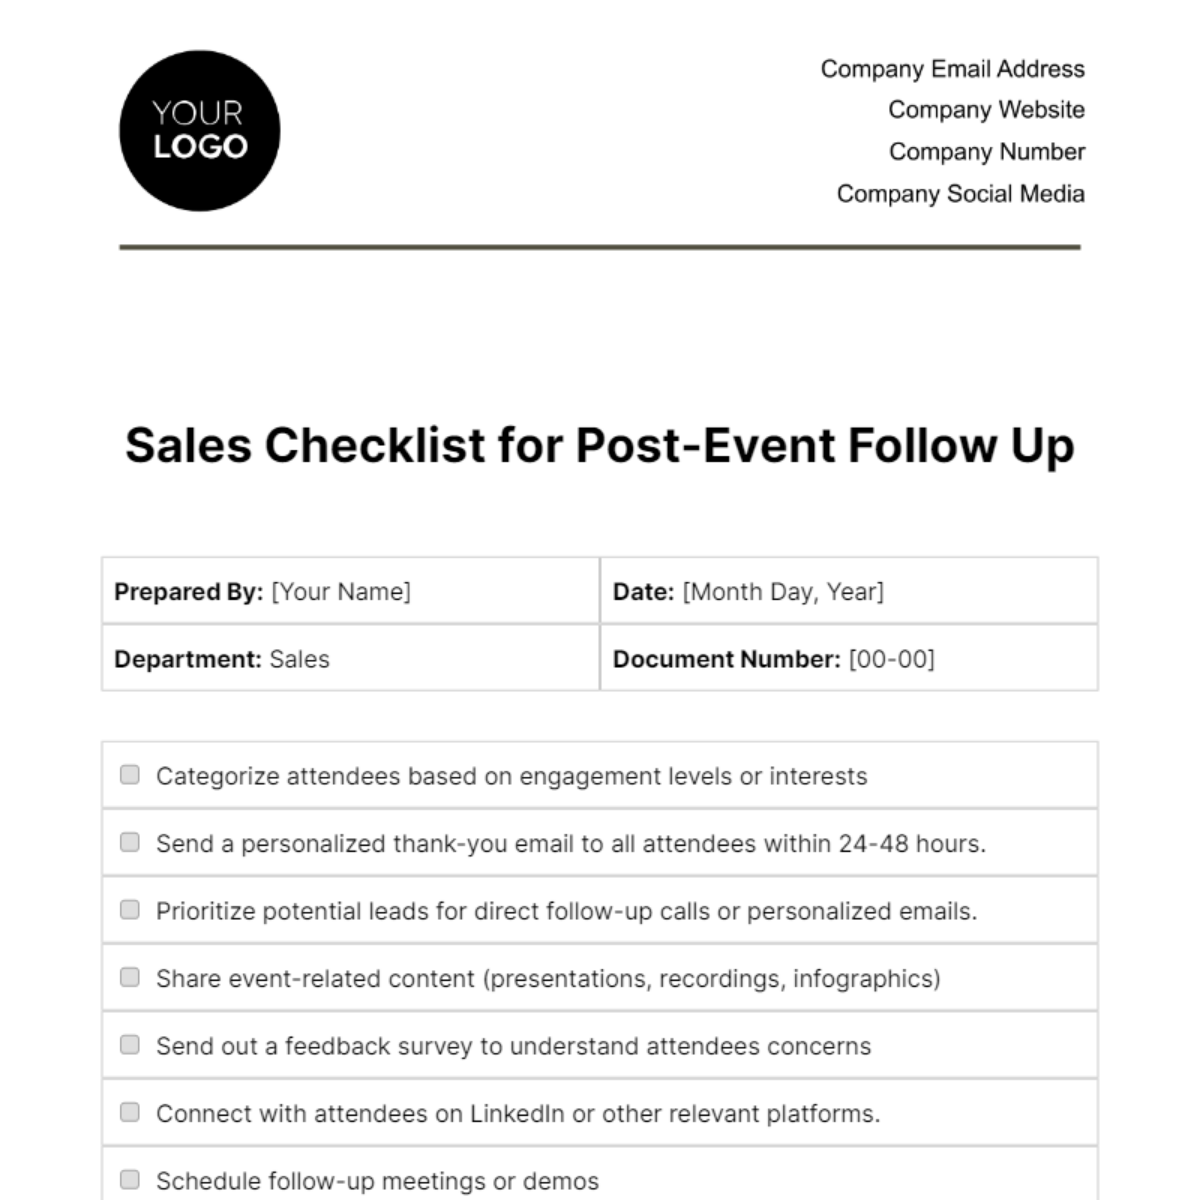 Free Sales Checklist for Post-Event Follow-Up Template